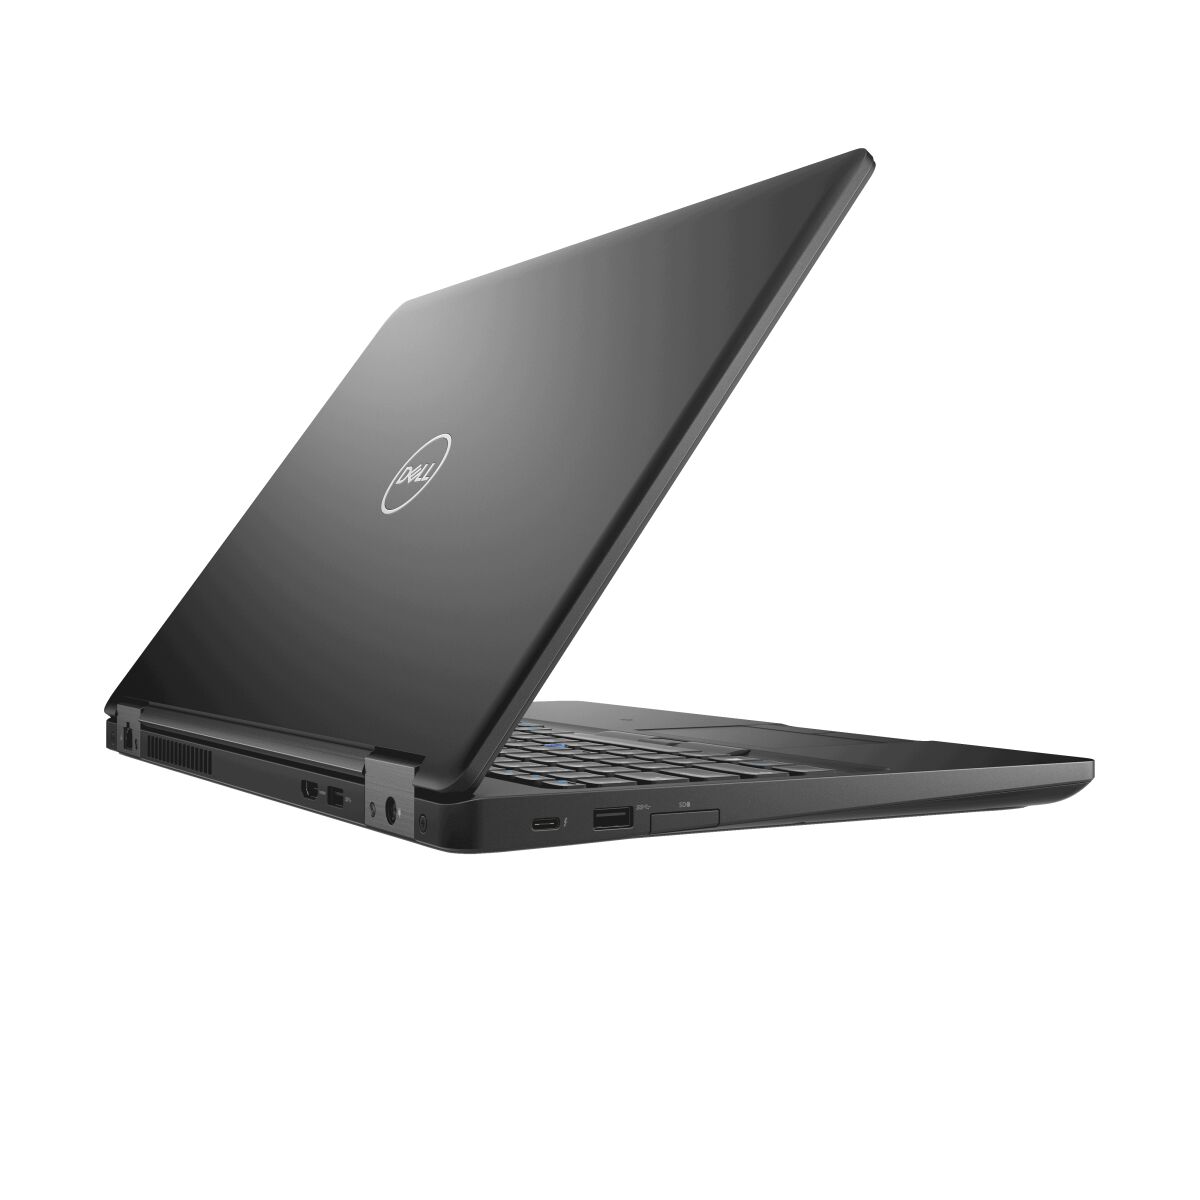 DELL Precision 3530 - XCTOP3530HWUS4 laptop specifications